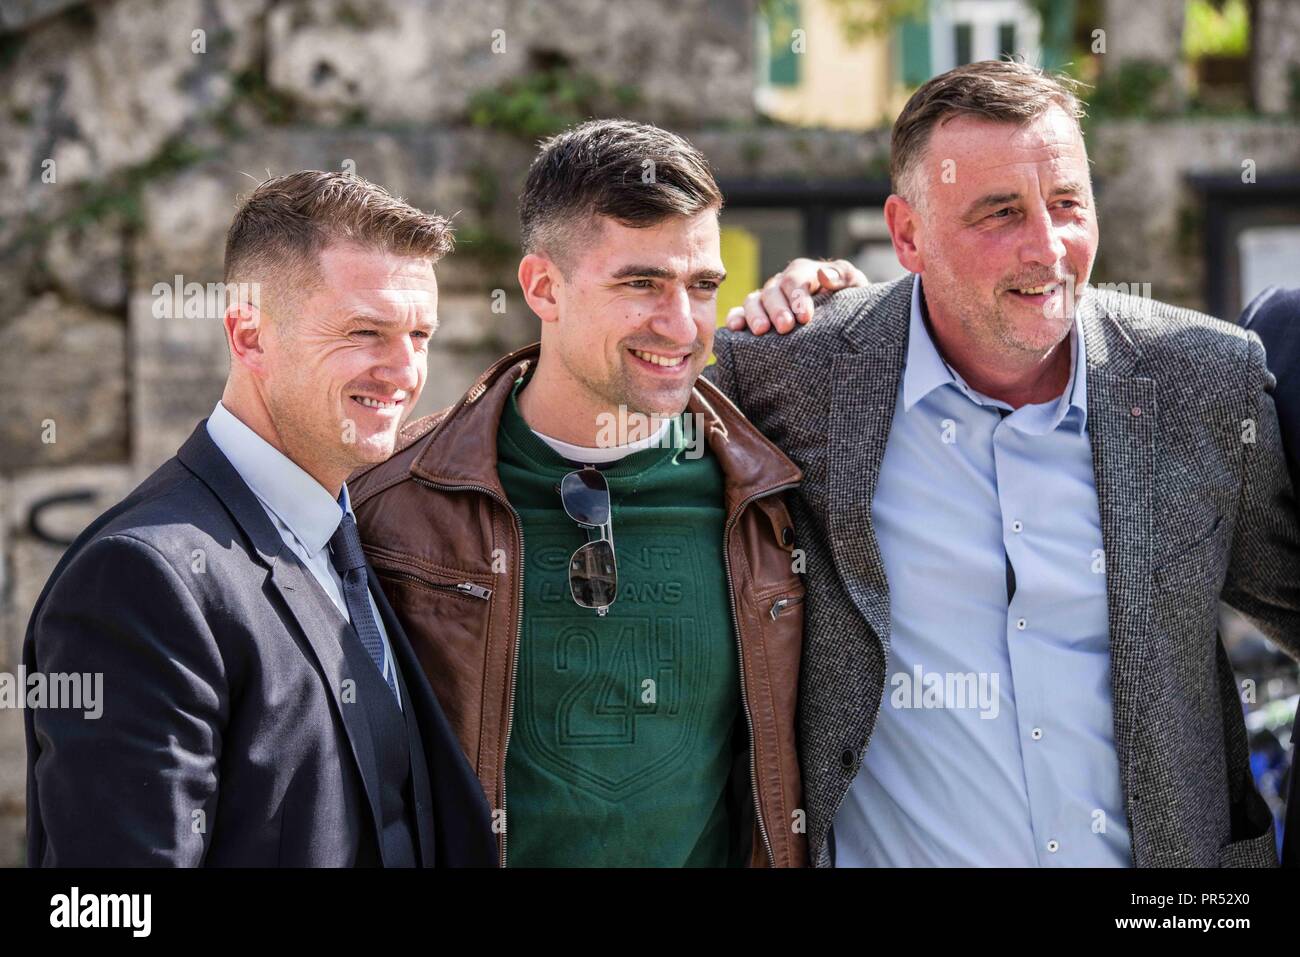 Garmisch Partenkirchen, Bavaria, Germany. 29th Sep, 2018. EDL founder TOMMY ROBINSON with Austrian right-extremist and head of the Identitaeren Movement MARTIN SELLNER and Pegida founder LUTZ BACHMANN. Sellner is also associated with white supremacists in the United States and Canada. Adding themselves to the 'who's who'' list of of several hundred right-extremists from Germany, Austria, Switzerland, and other countries, Tommy Robinson, founder of the British EDL, Lutz Bachmann, grounder of Germany's Pegida, and Martin Sellner of the Identitaere Bewegung were guests as the Compac Stock Photo